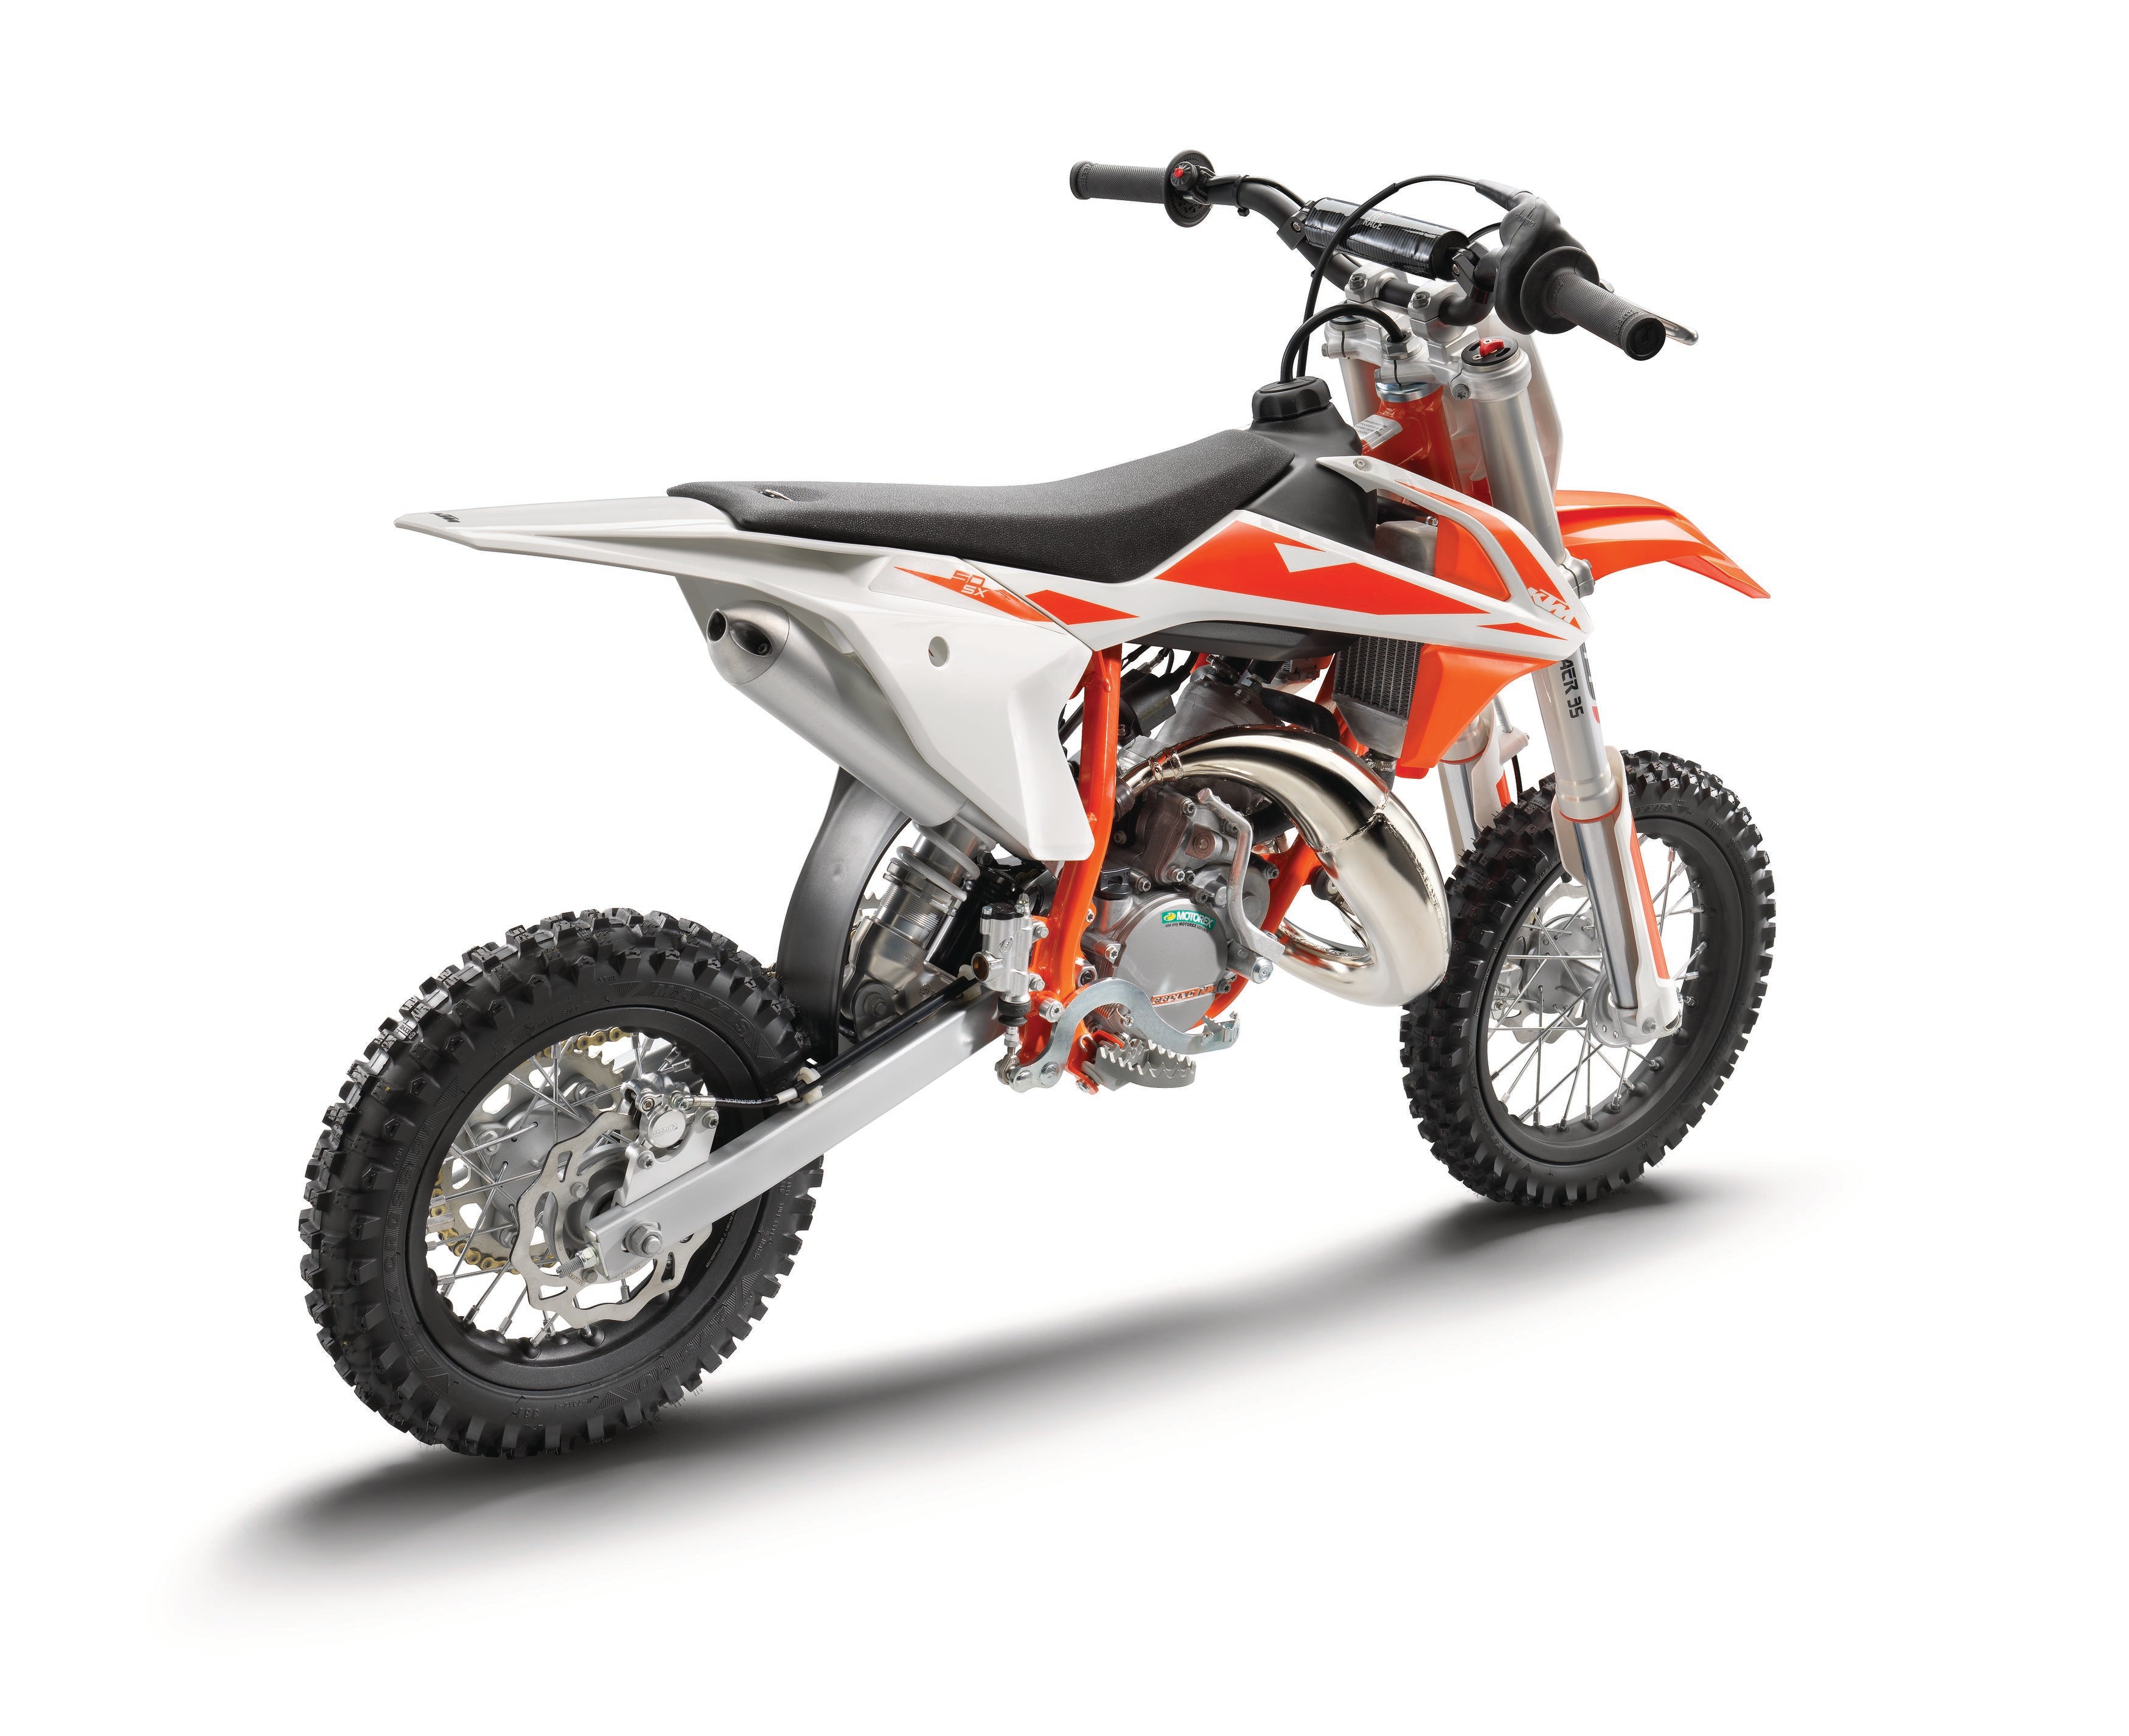 2019 KTM SX and SXF Model Lineup First Look